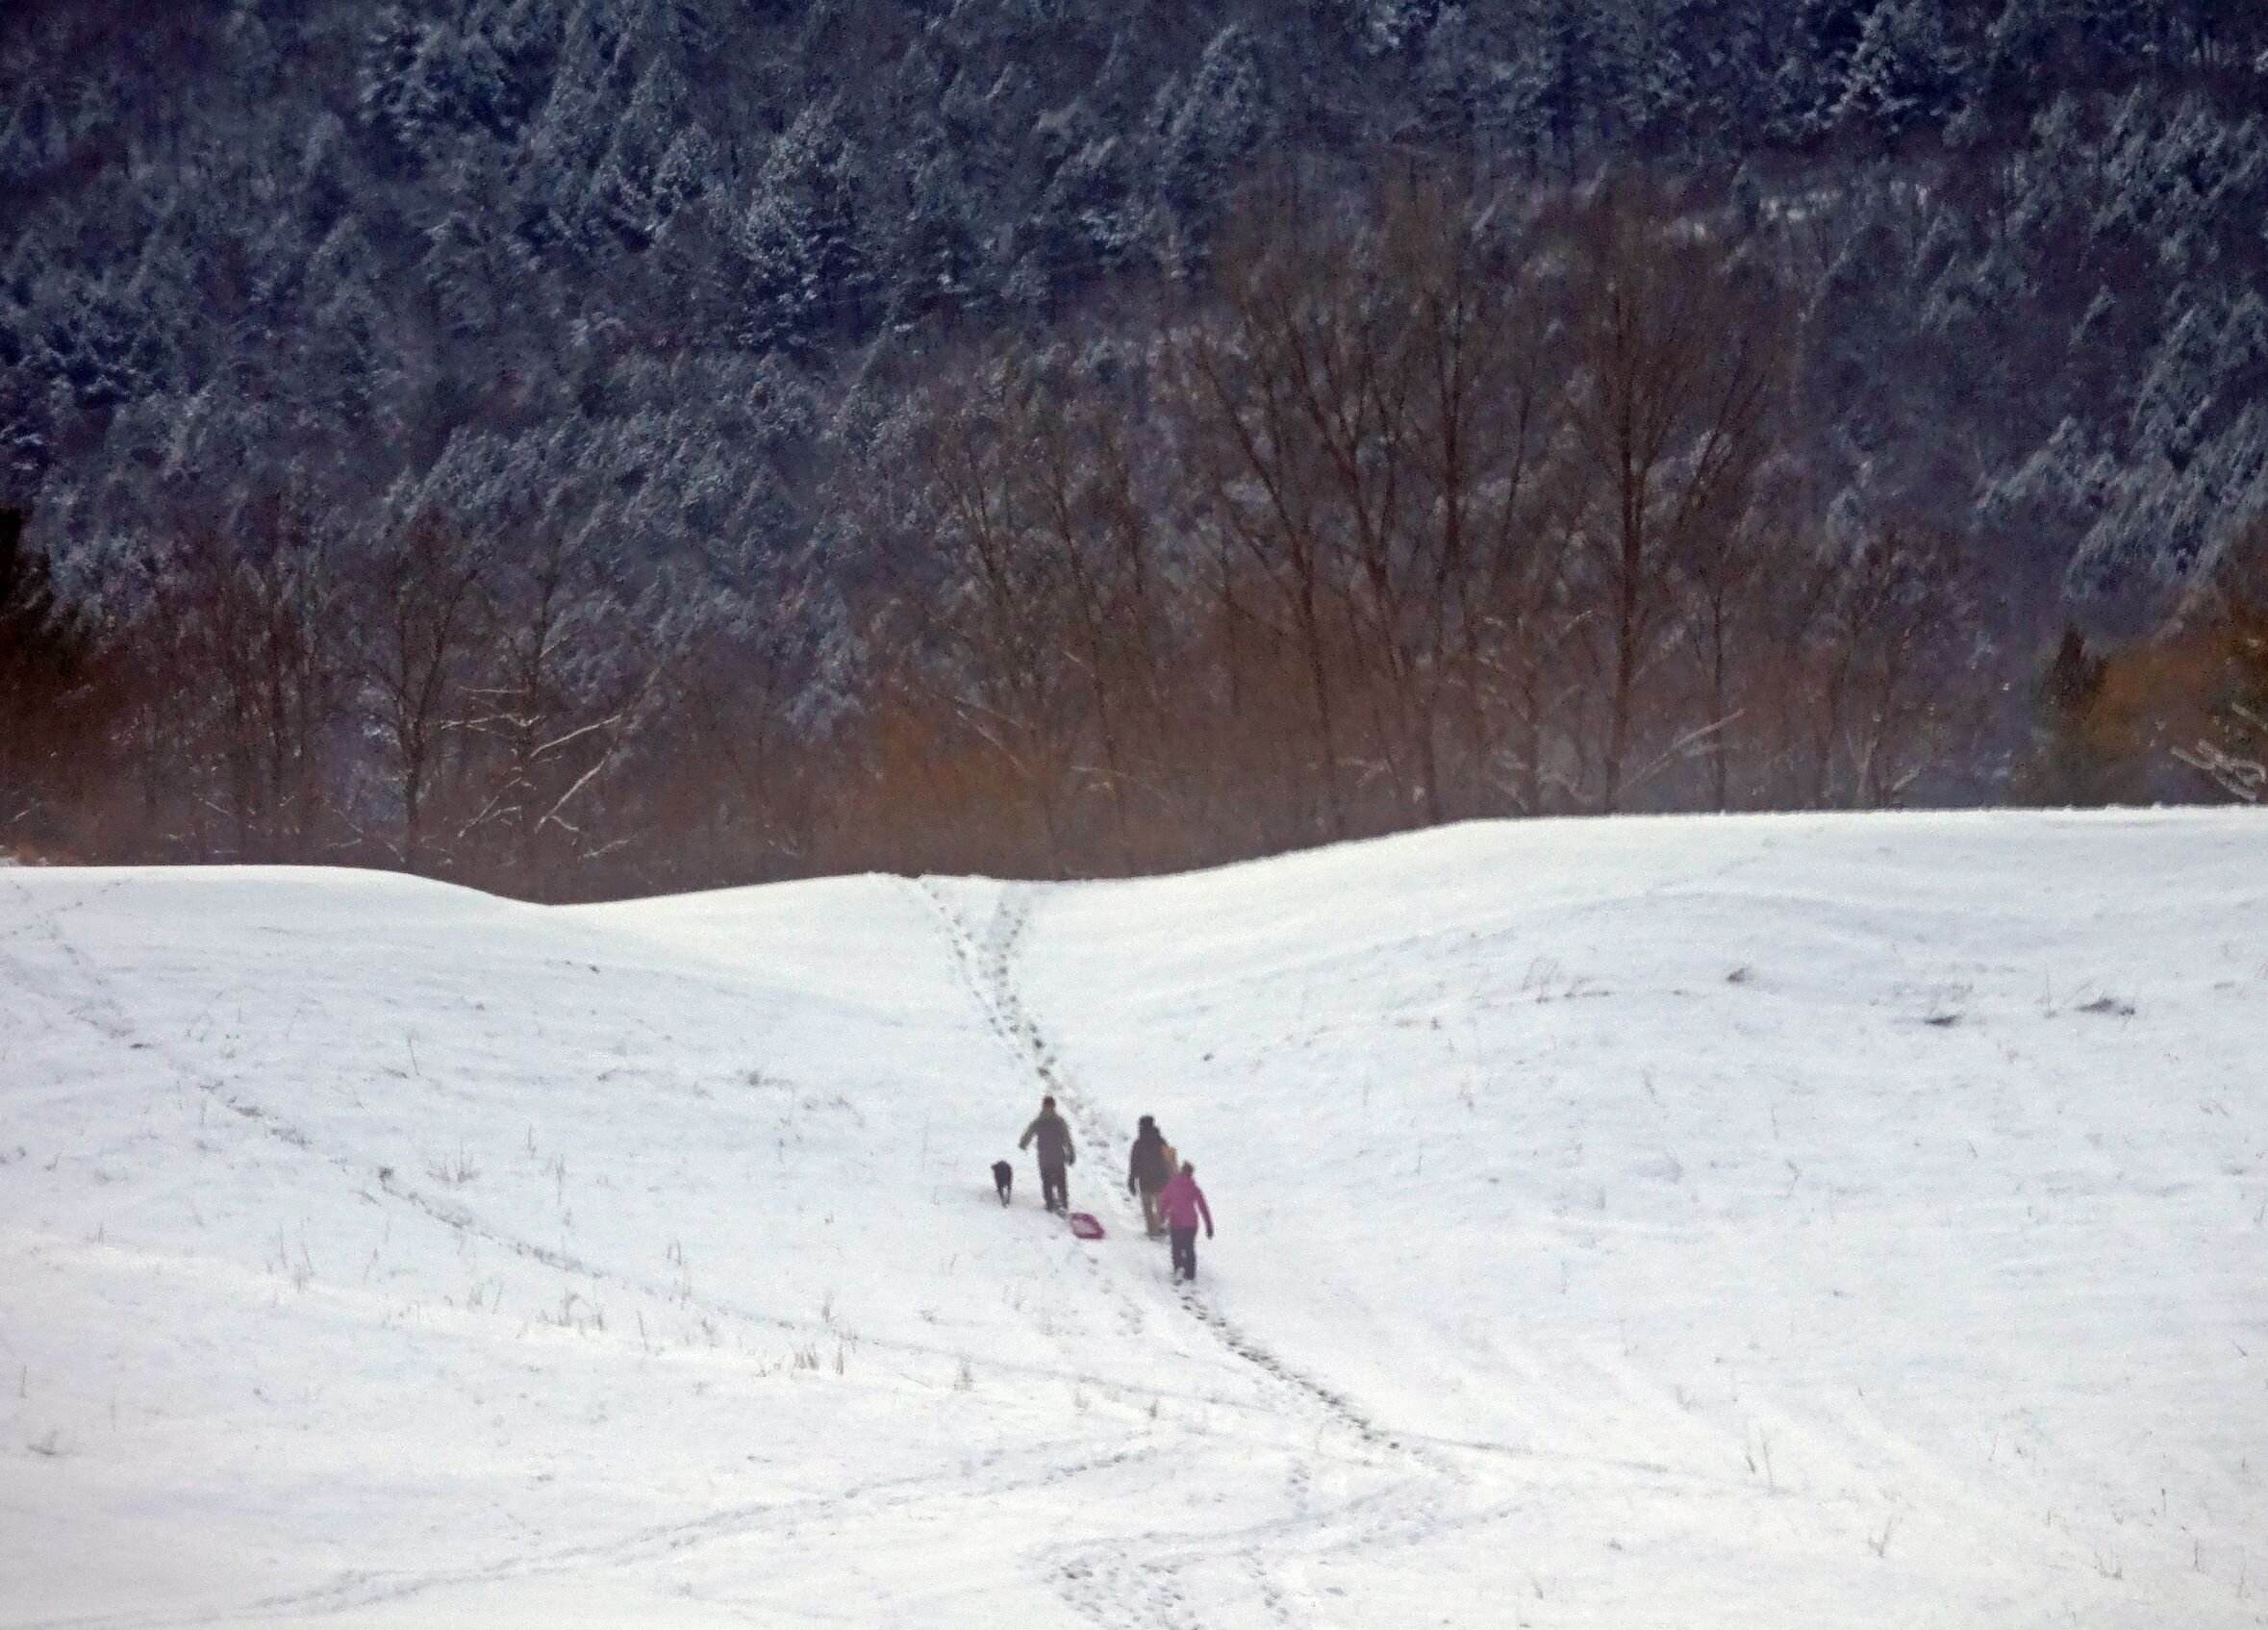   From a distance, winter looks pretty normal on the sledding hill. Photo by Gordon Miller.   